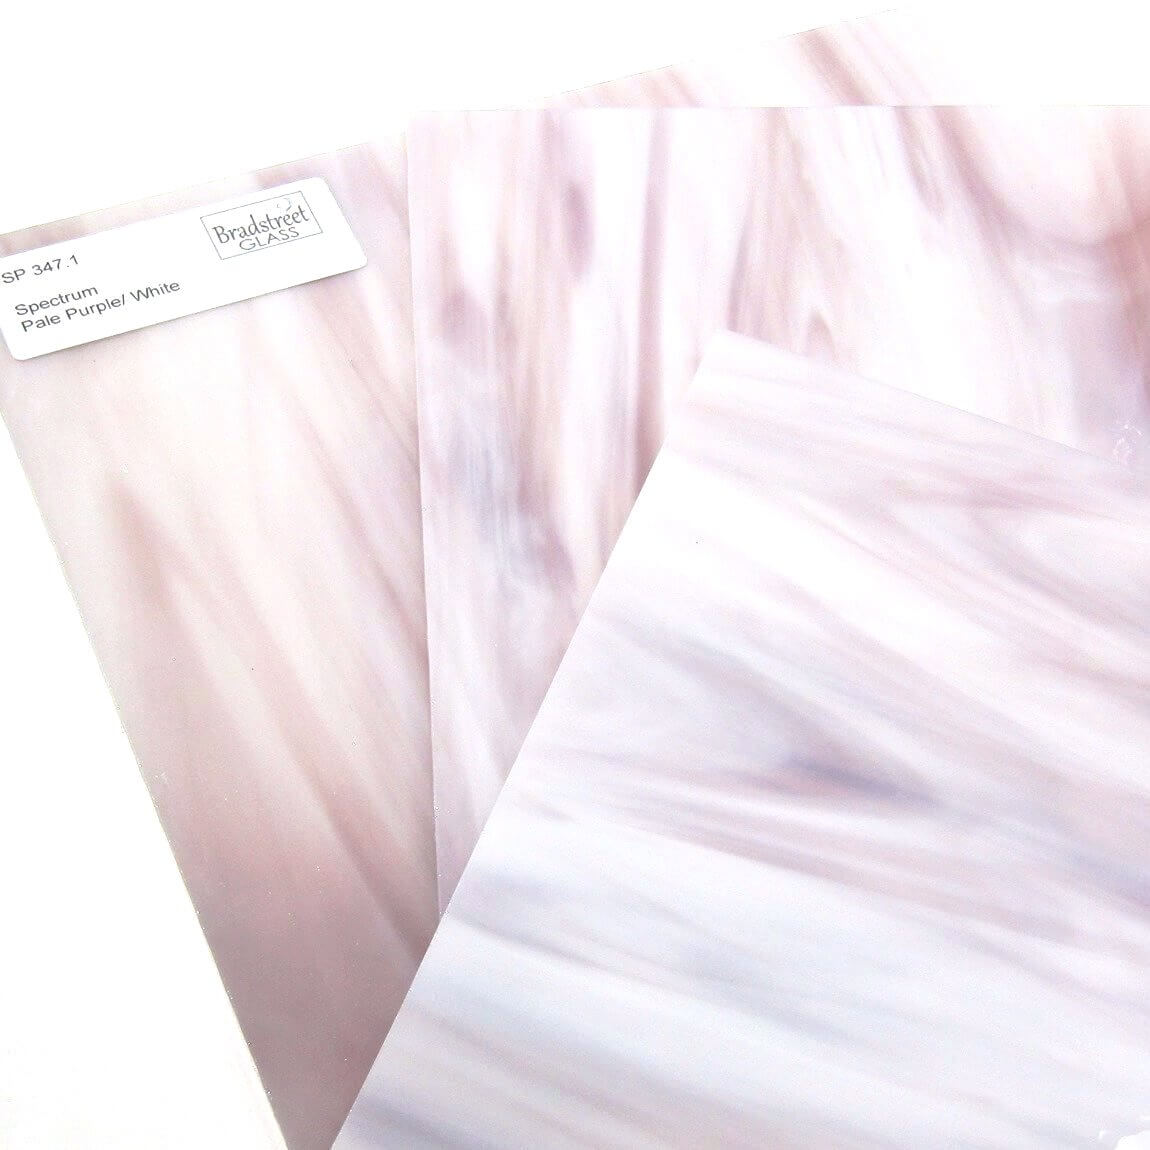 Spectrum SP 347.1 Stained Glass Sheet Streaky Pale Purple and White Opal